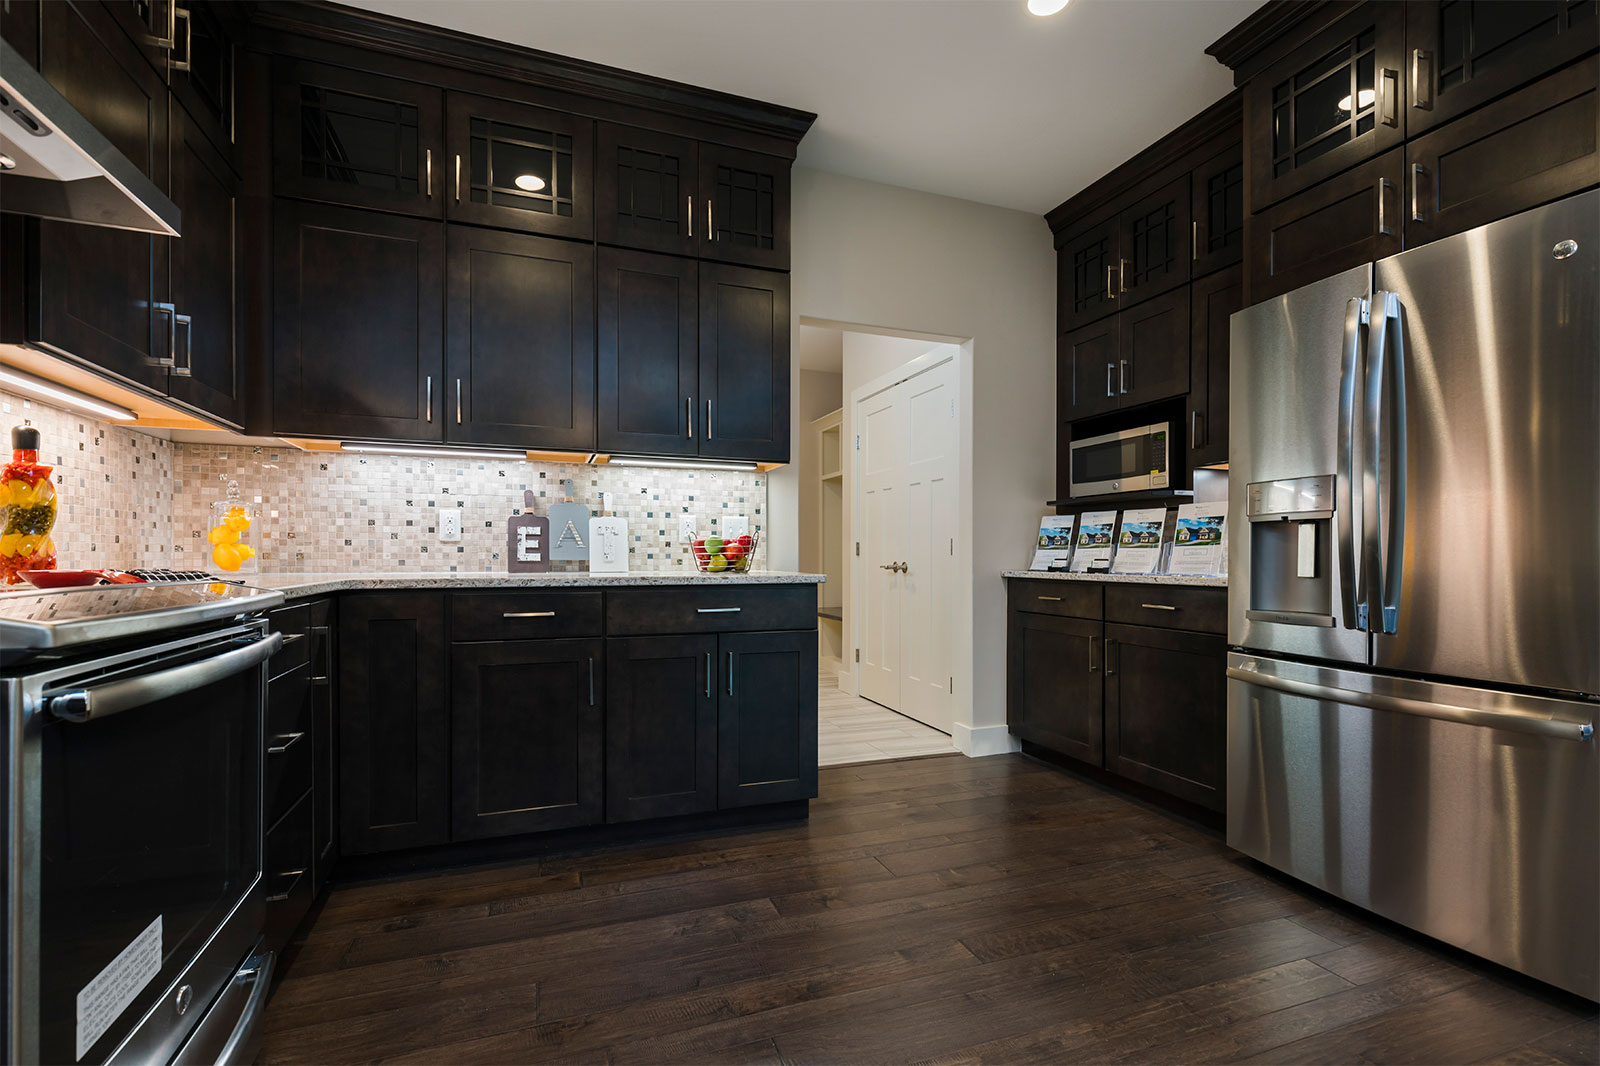 A kitchen with black cabinets and stainless steel appliances from a luxury home at the Villas at Blystone in Monclova, Ohio, constructed by the team at Miller Diversified